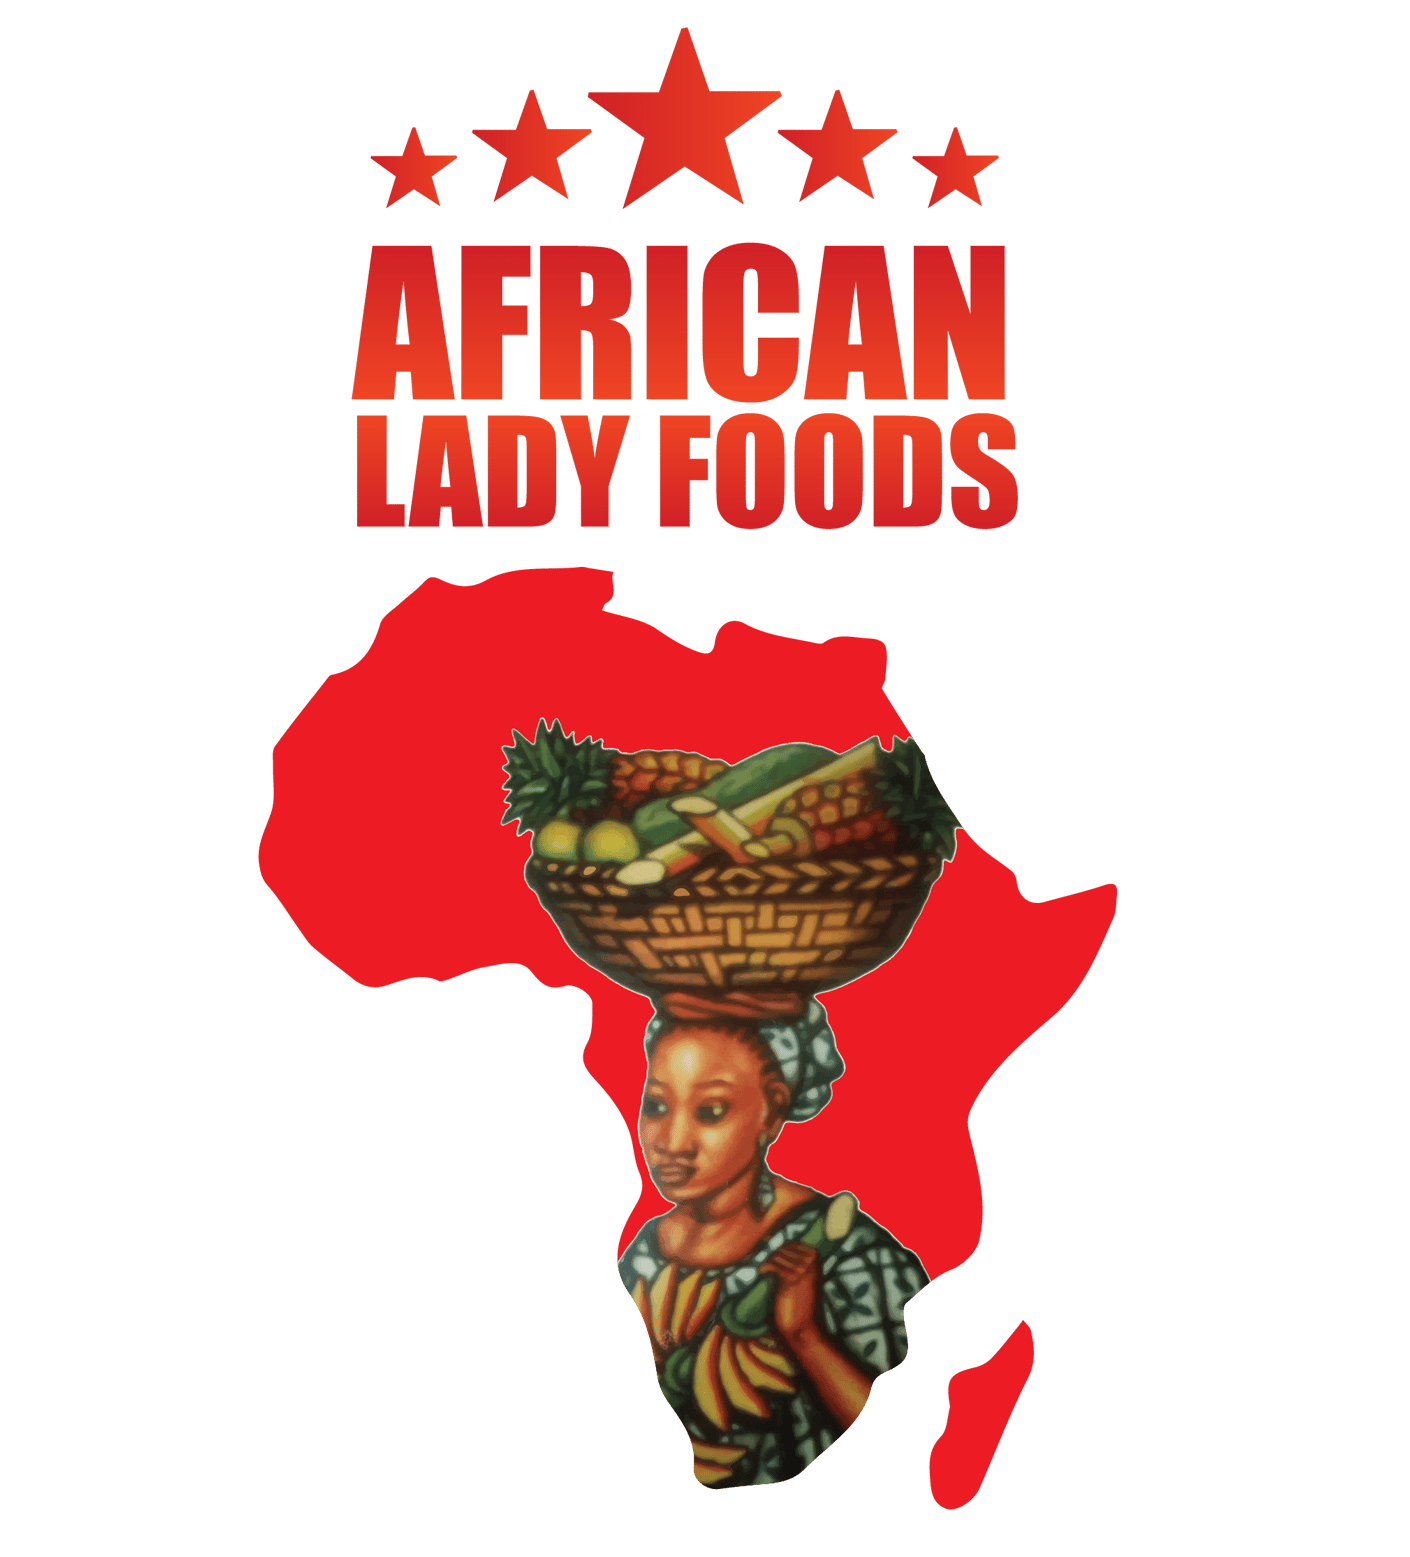 African Lady Foods